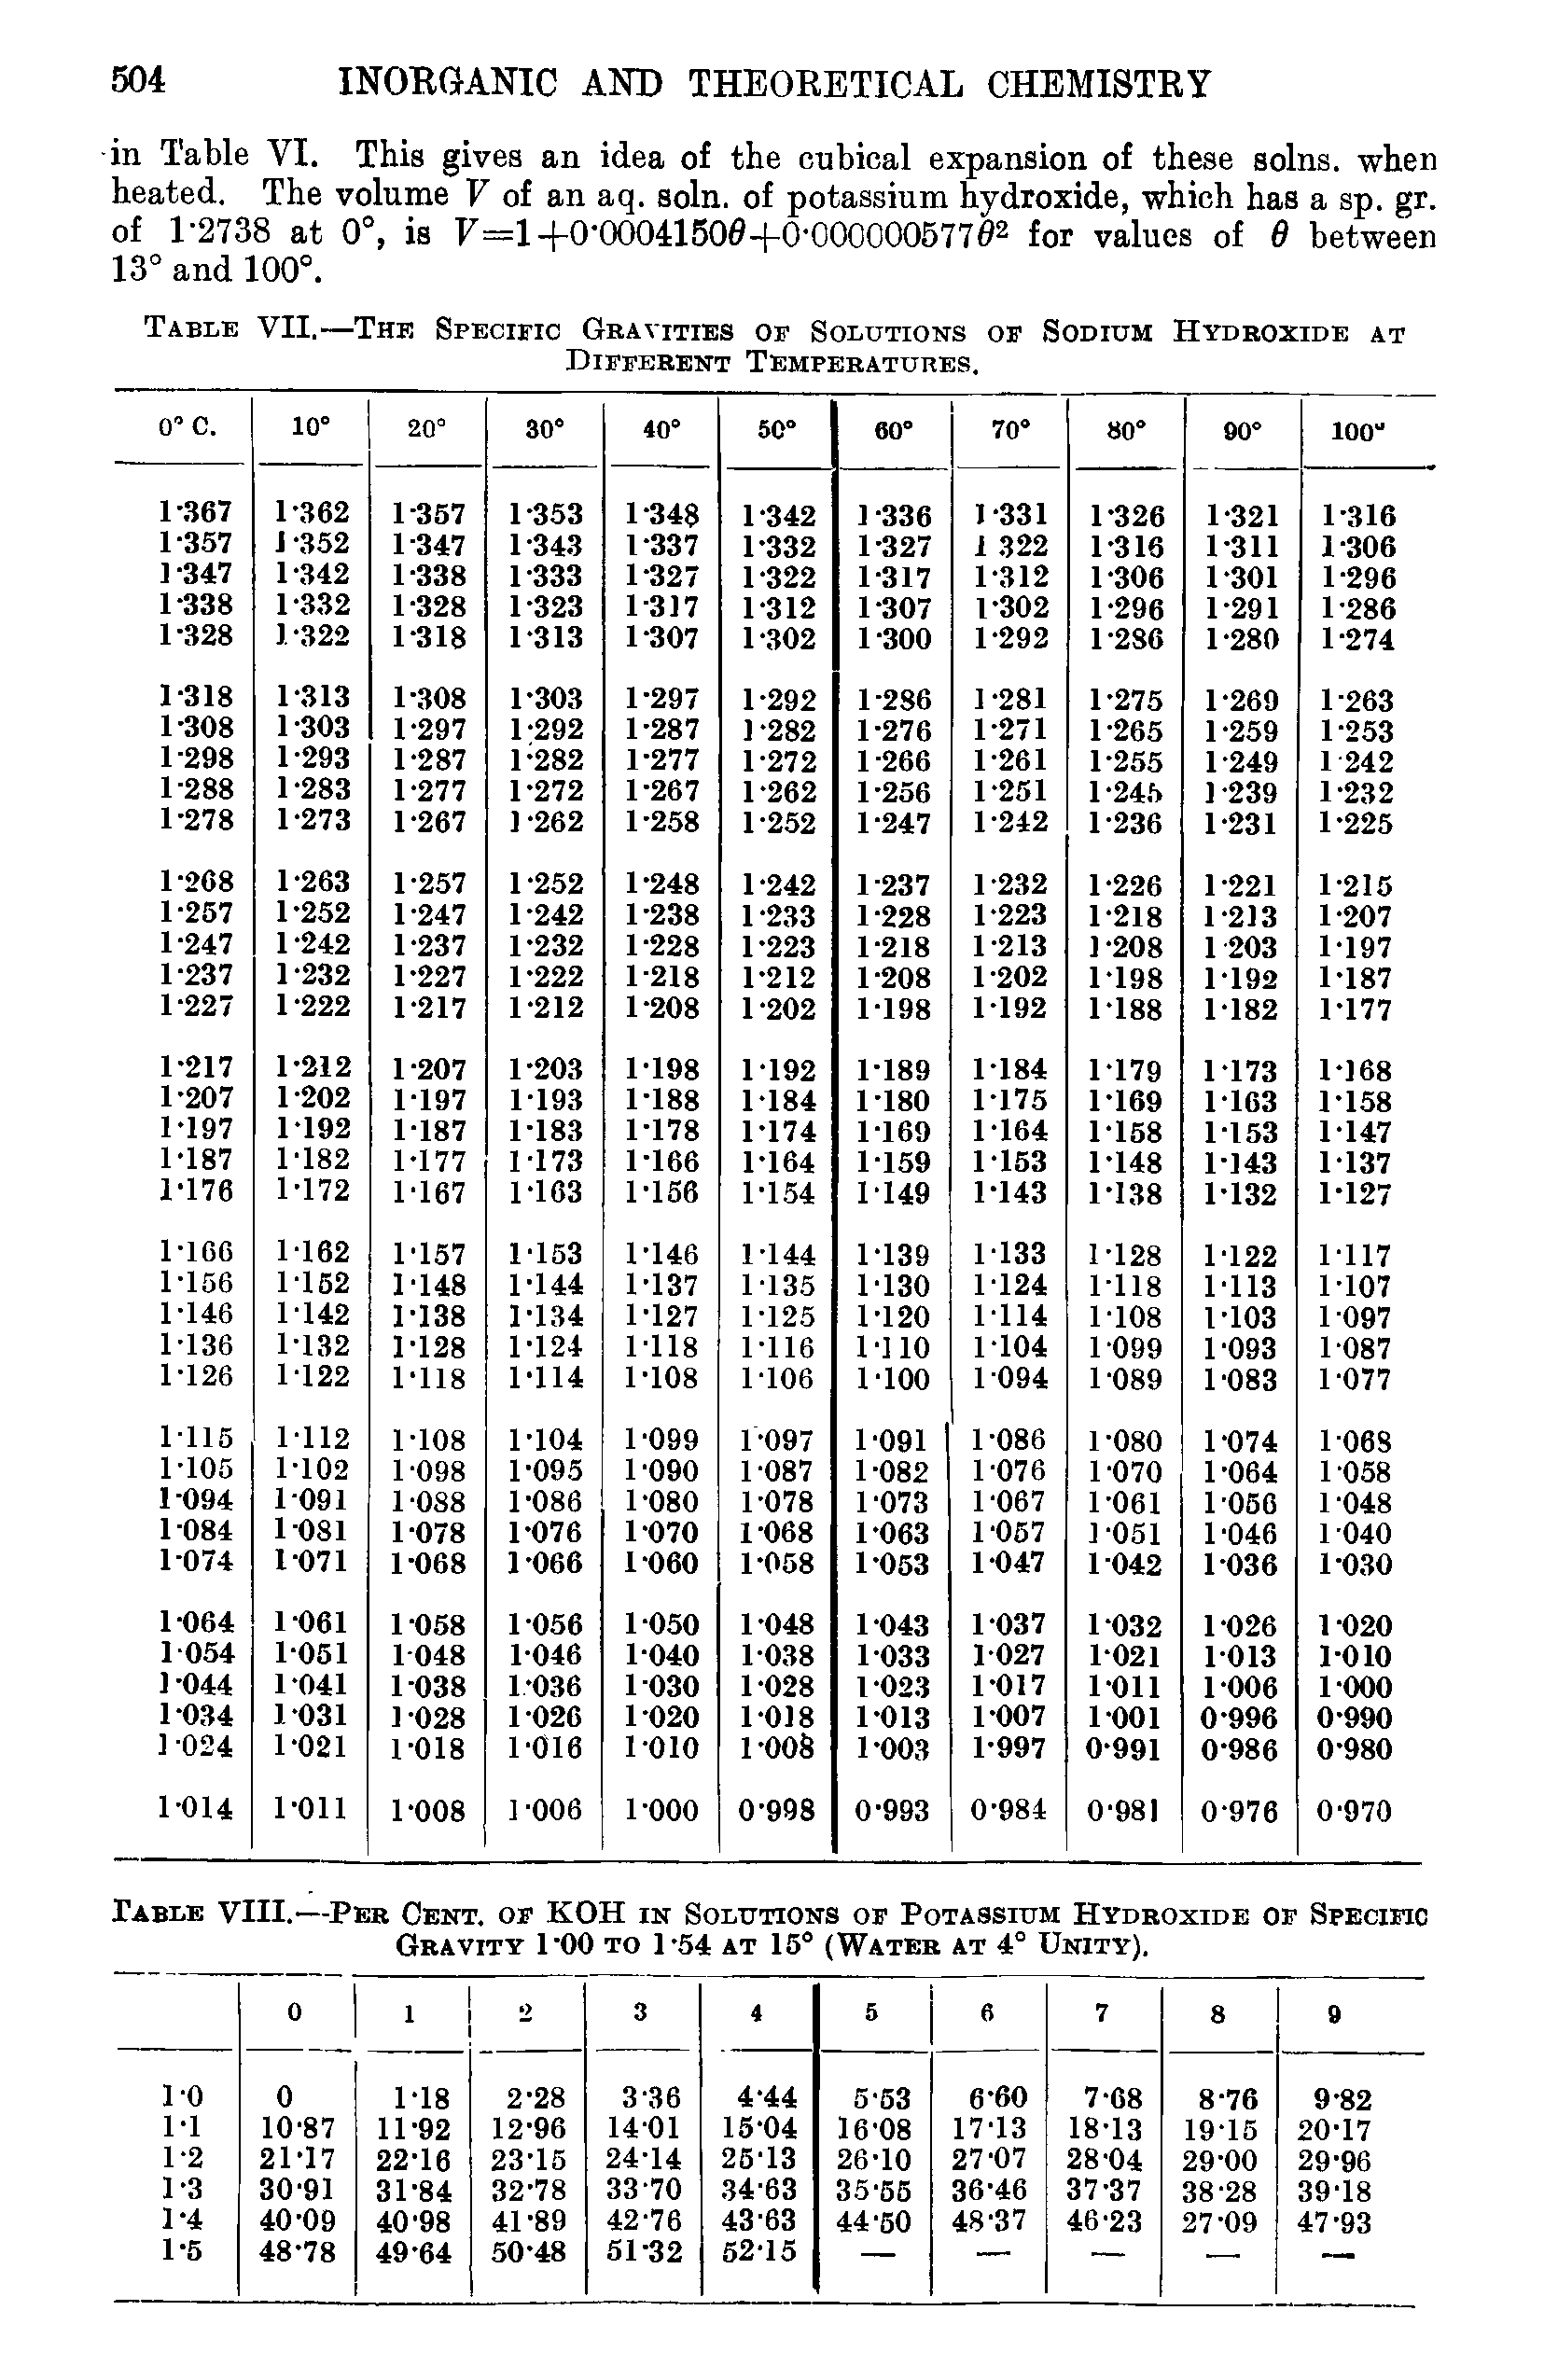 Table VIII.—Per Cent, of KOH in Solutions of Potassium Hydroxide of Specific Gravity l OO to 1-54 at 15° (Water at 4° Unity).